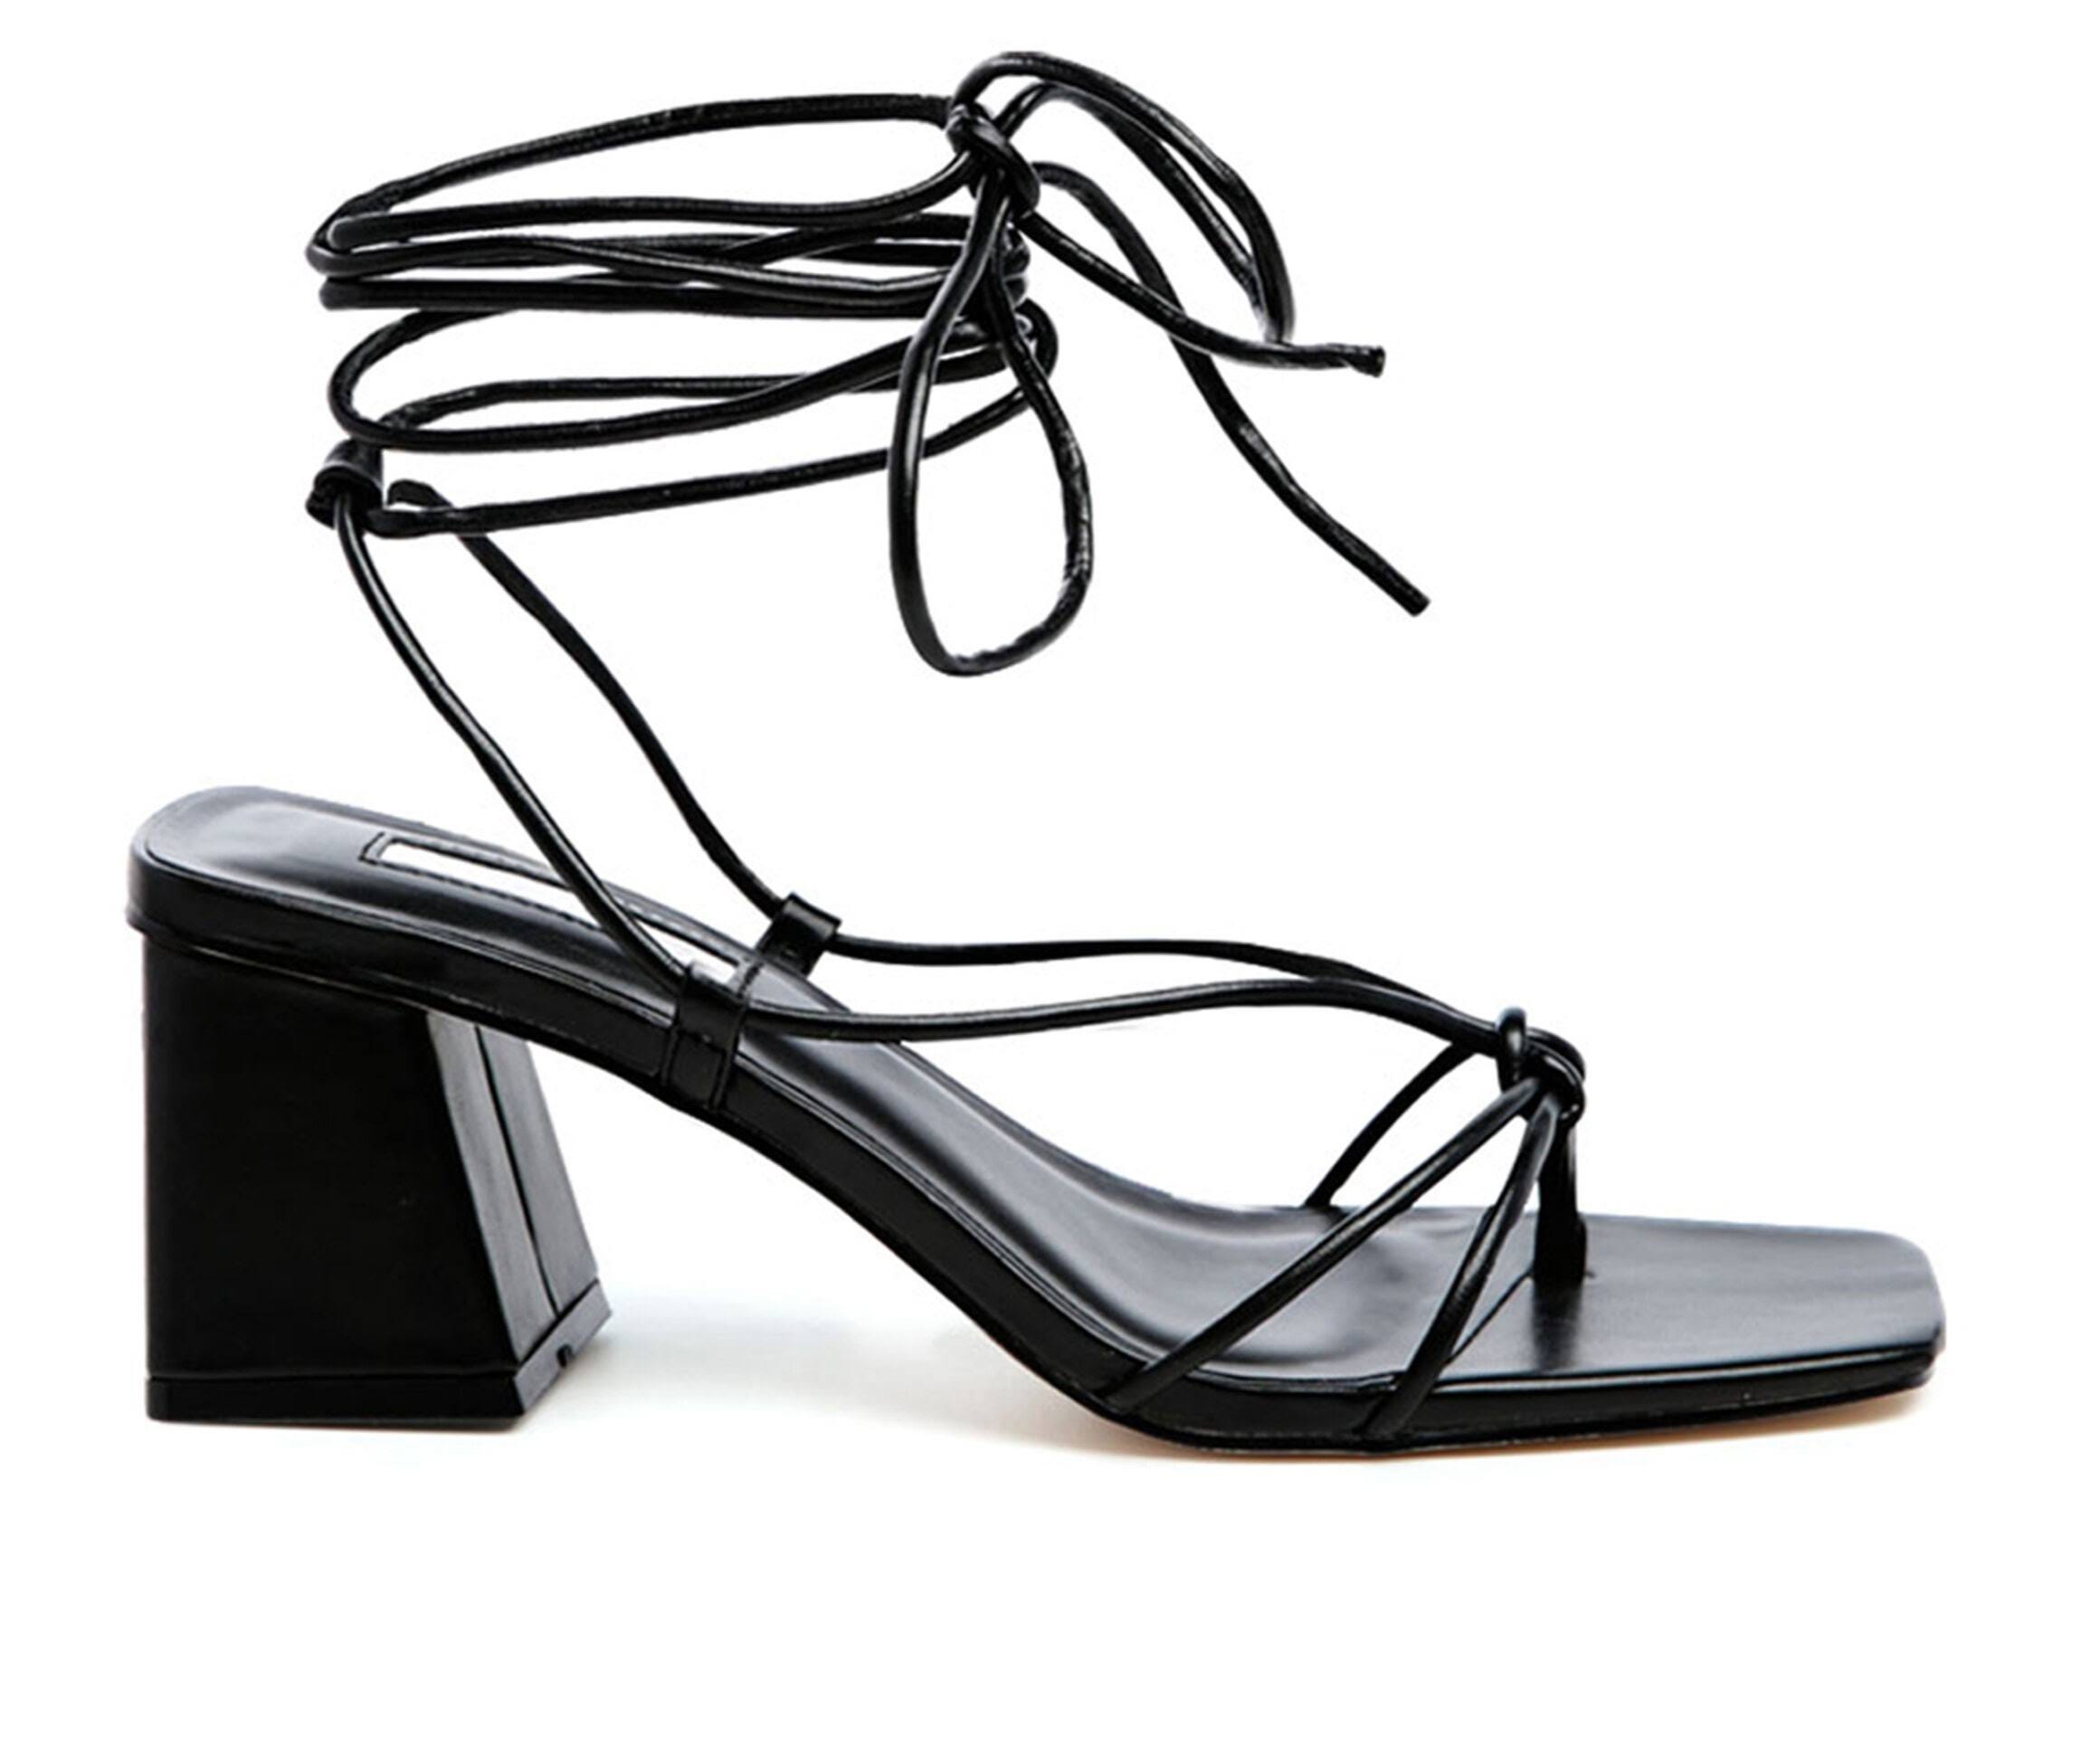 Comfy Block Heel Sandals by London Rag - Chic, Stylish, and Durable | Image